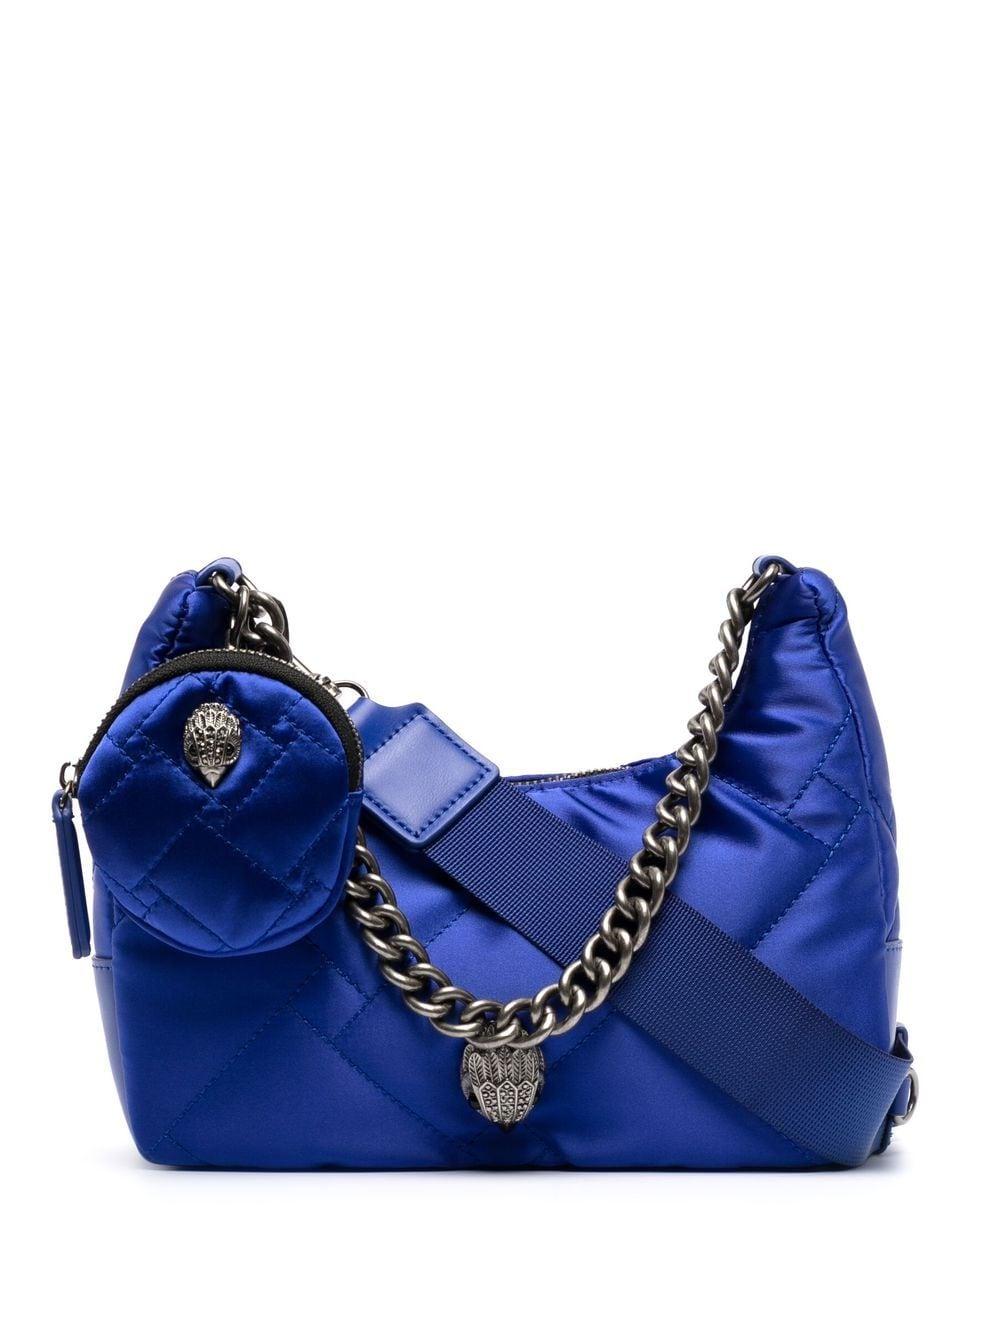 Kurt Geiger Recycled Quilted Crossbody Bag in Blue